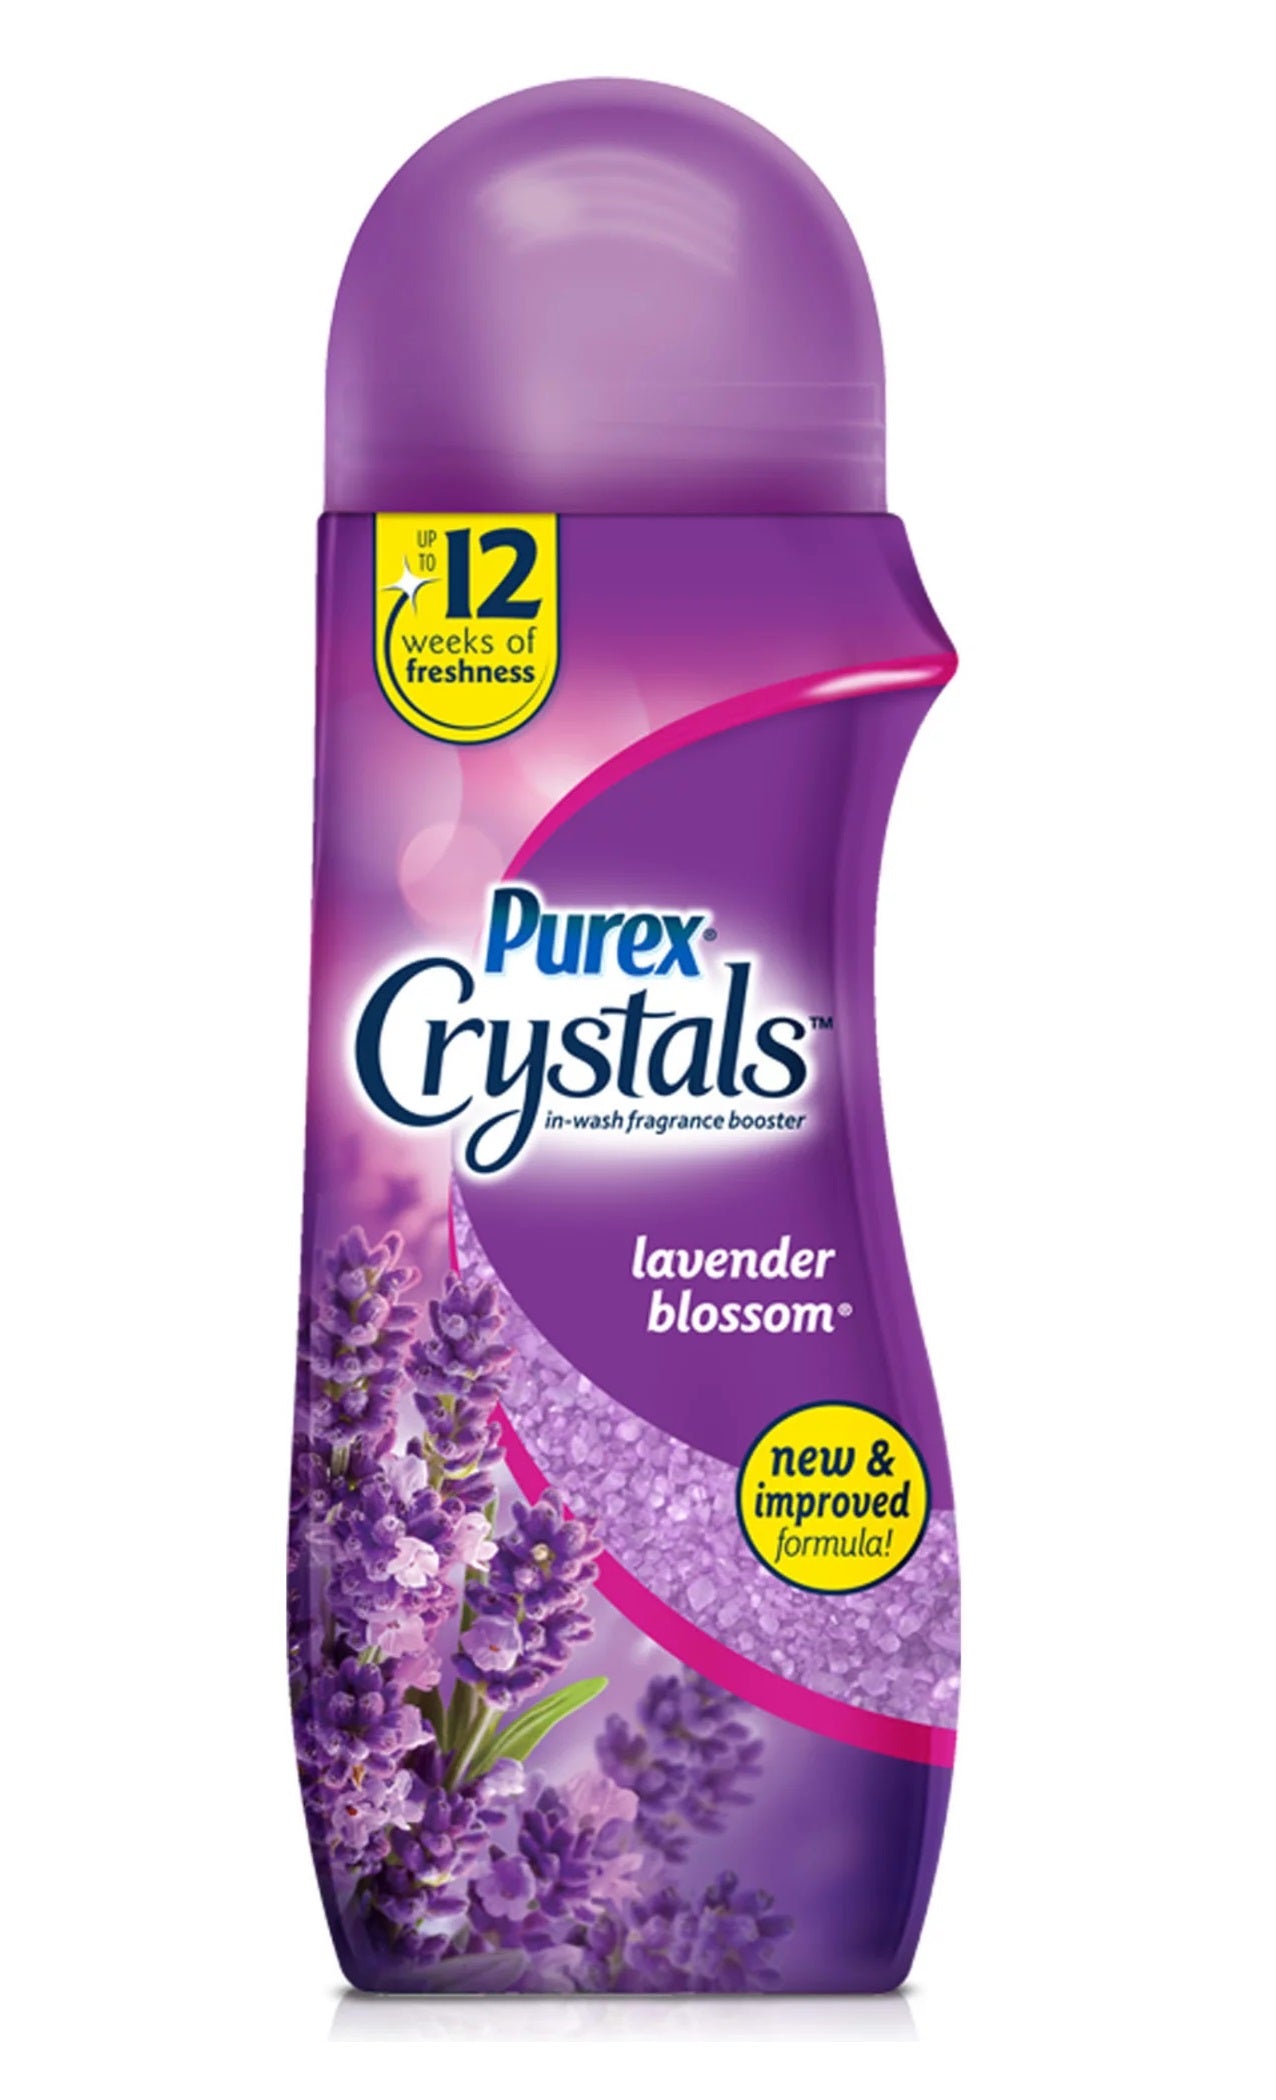 Purex Crystals In-Wash Fragrance and Scent Booster, Lavender Blossom Shaker - 21oz/4pk